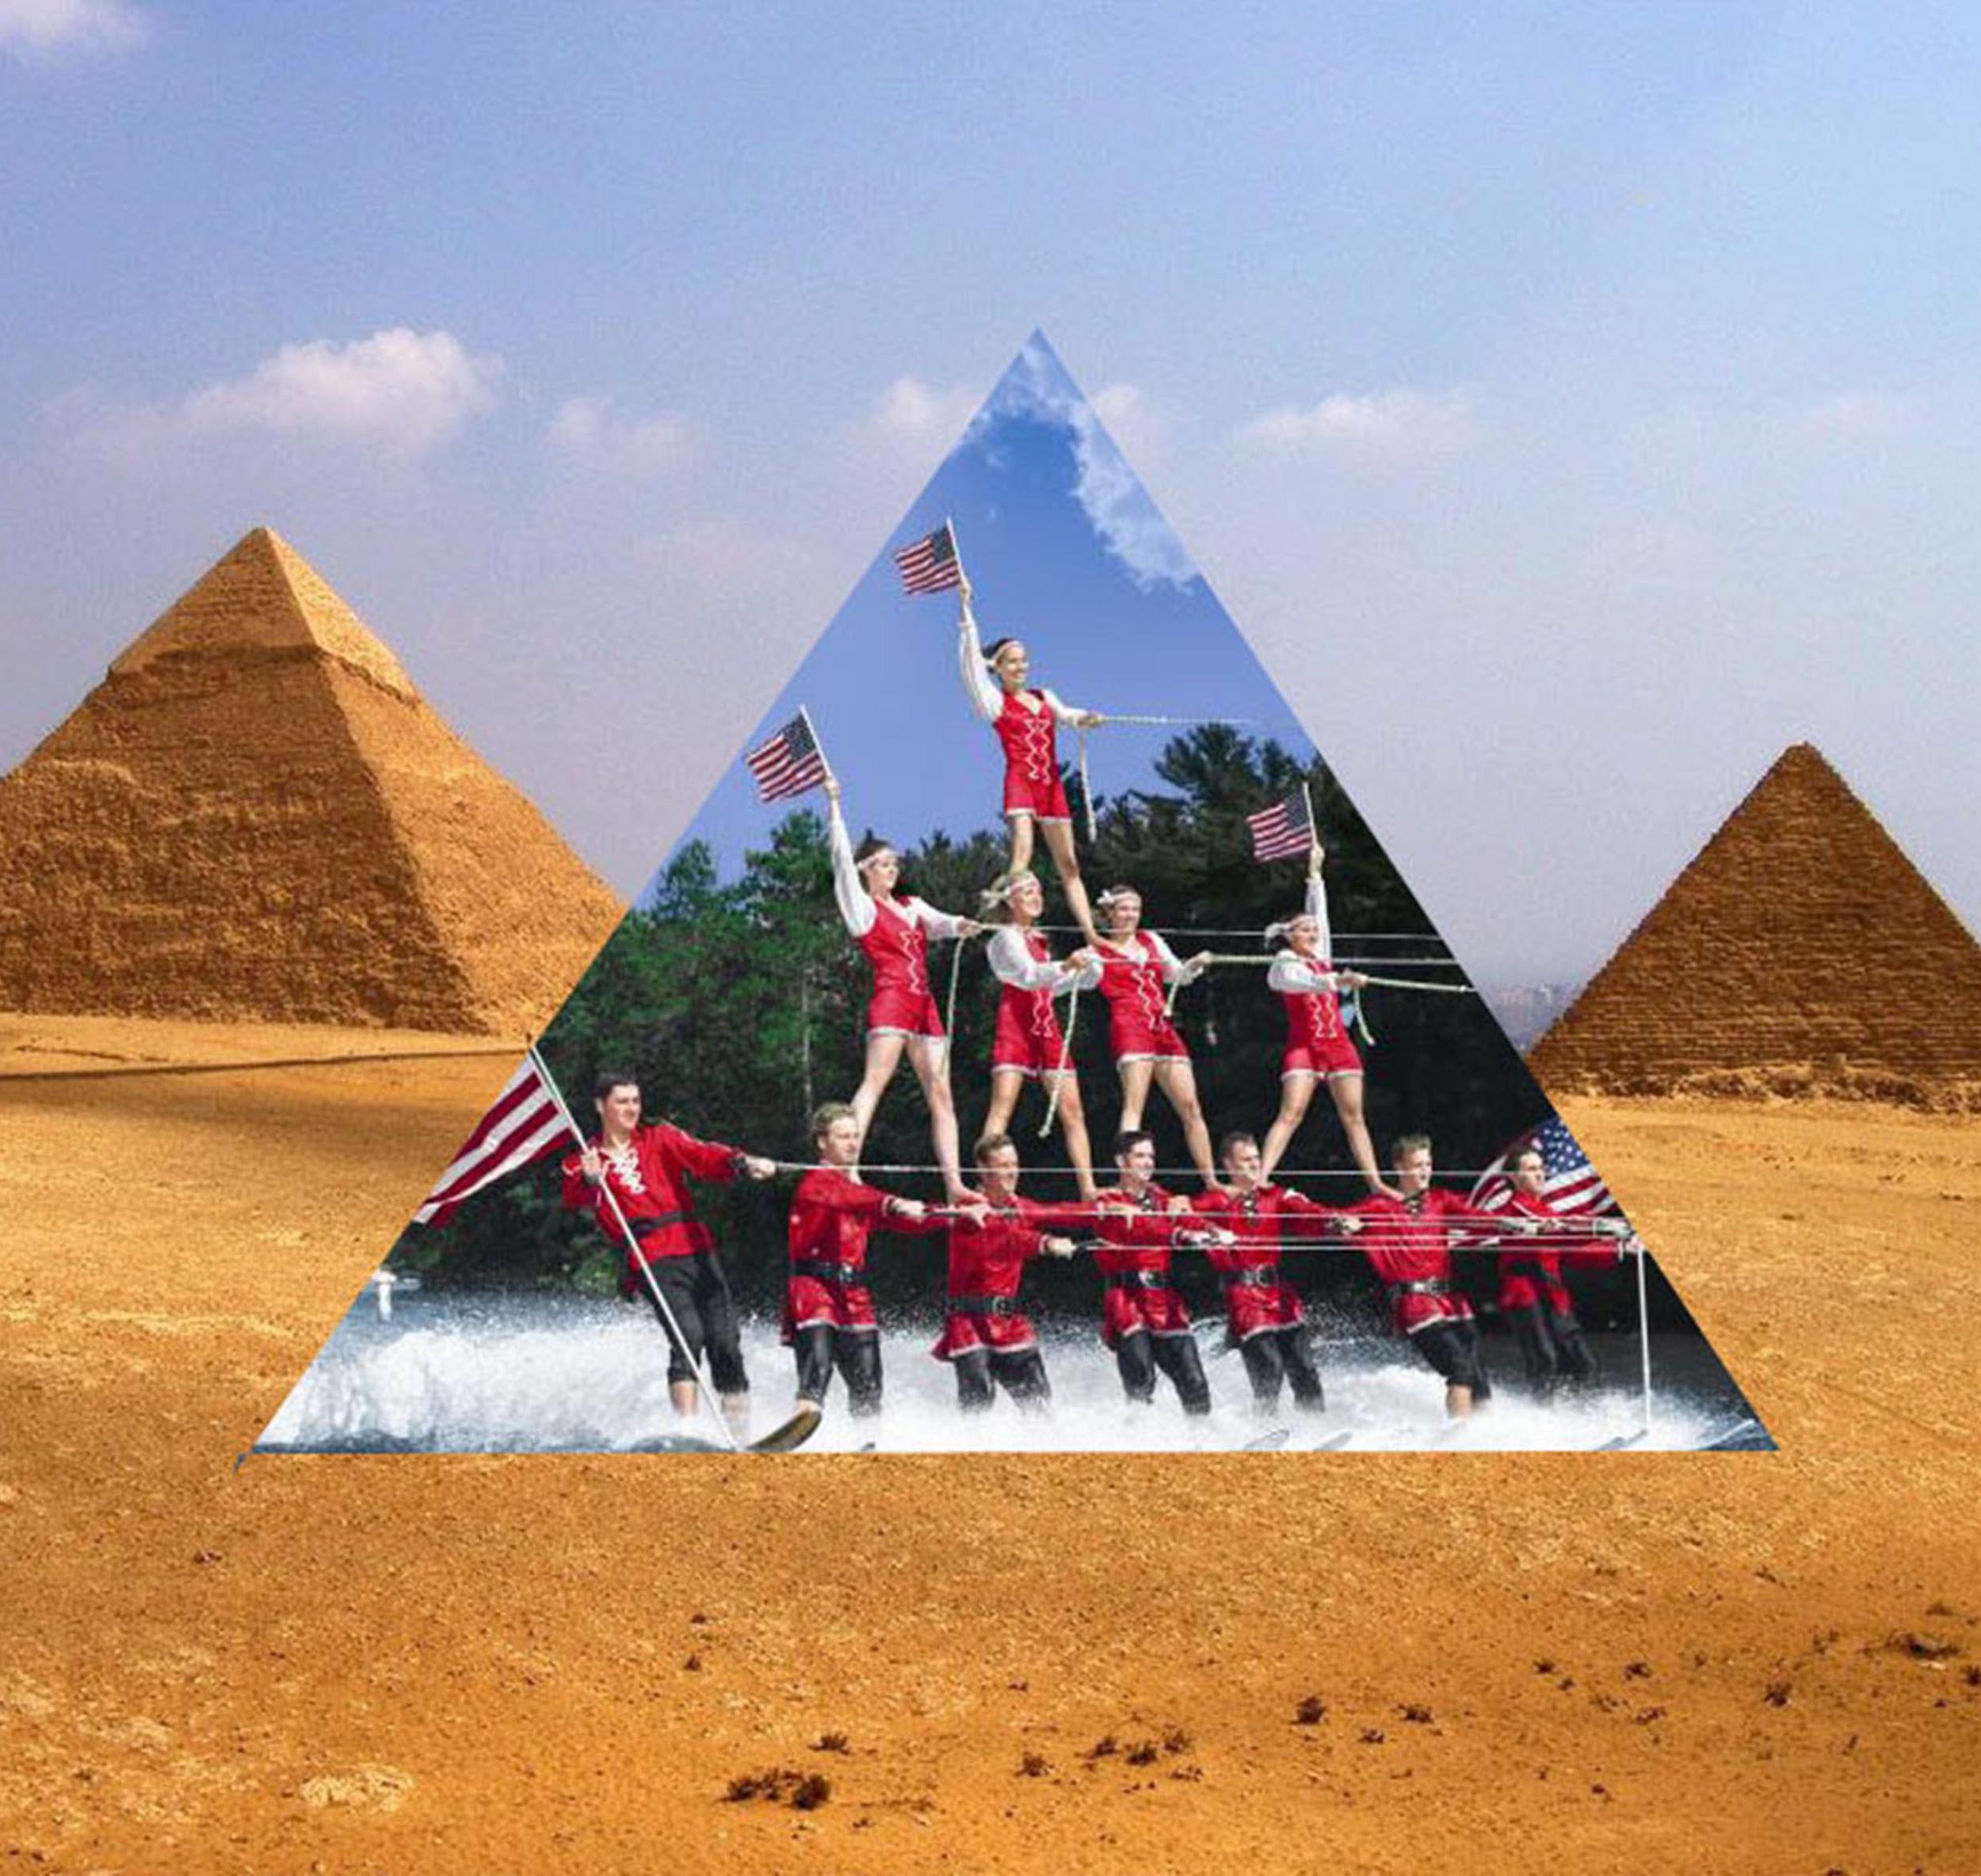 A collage of the desert with pyramids, the center of which has is a photograph of several people waterskiing in a pyramid formation.